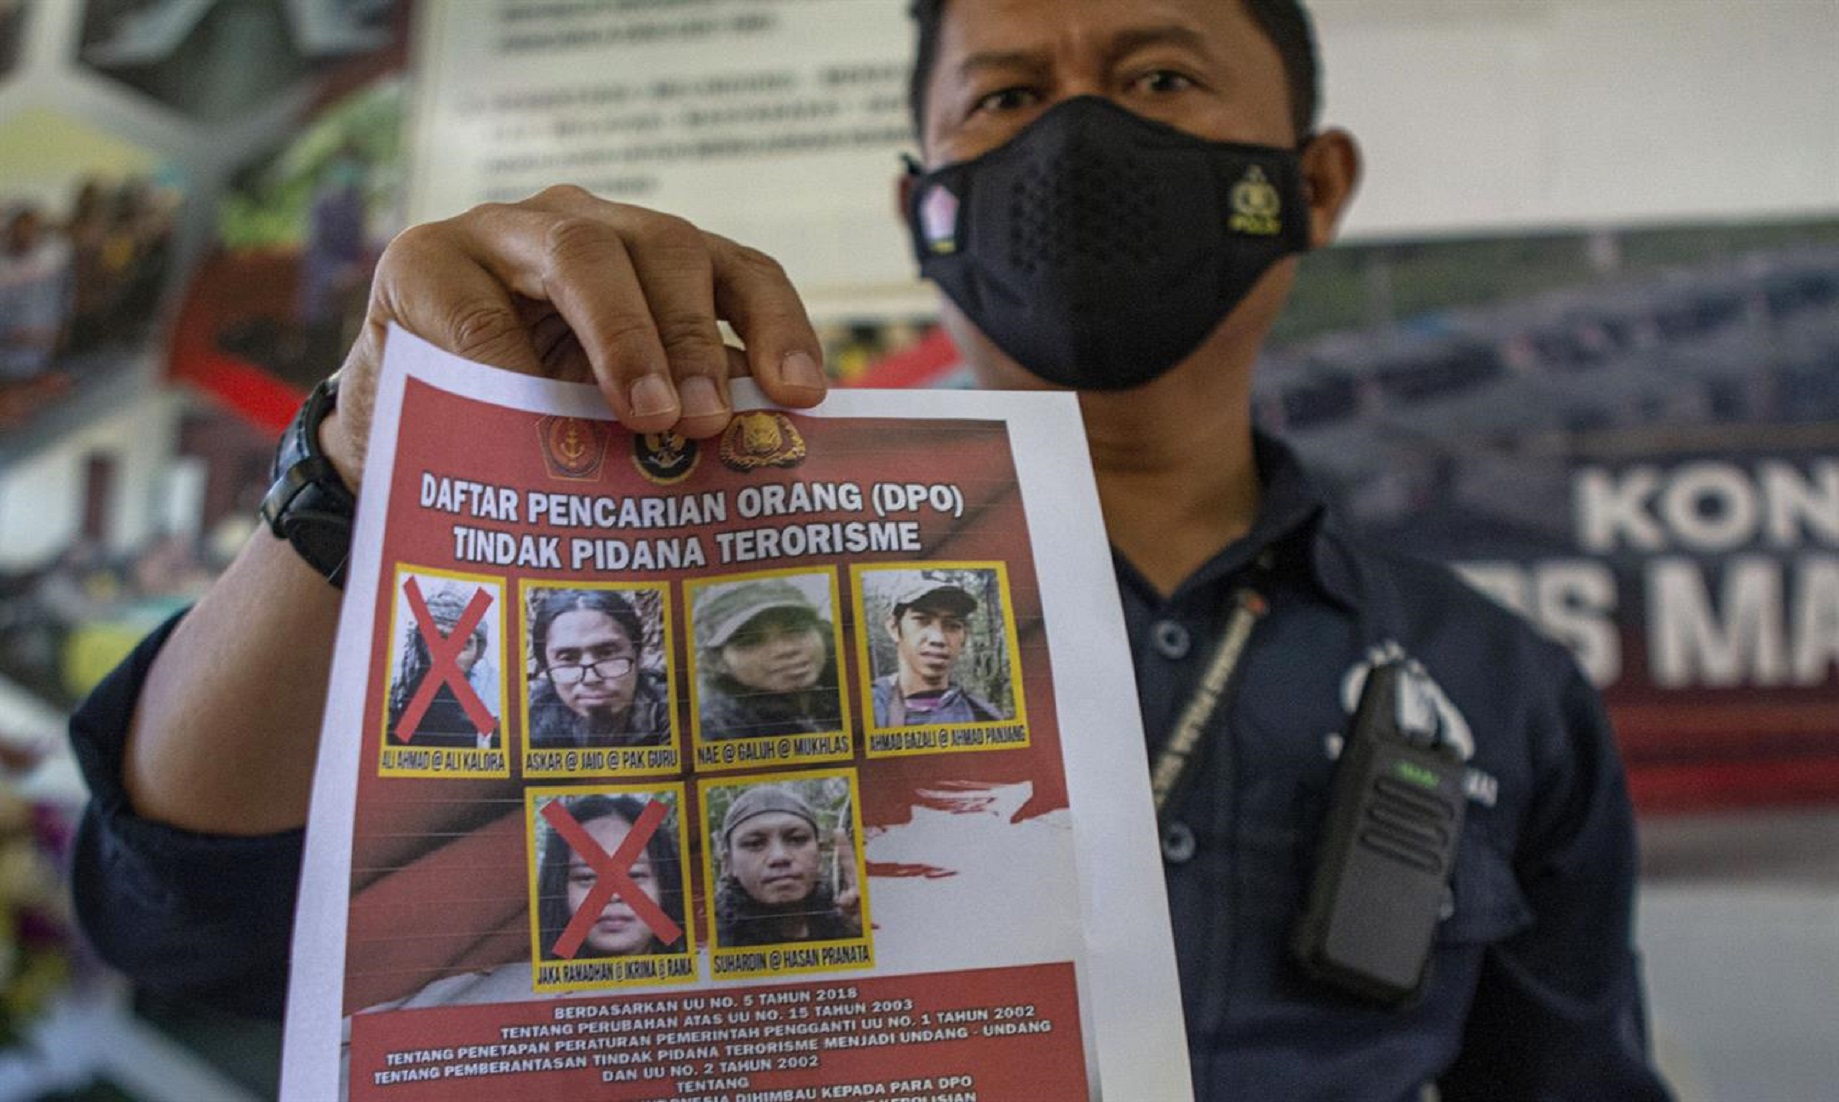 The Most Wanted Militant Group Leader Killed In Indonesia